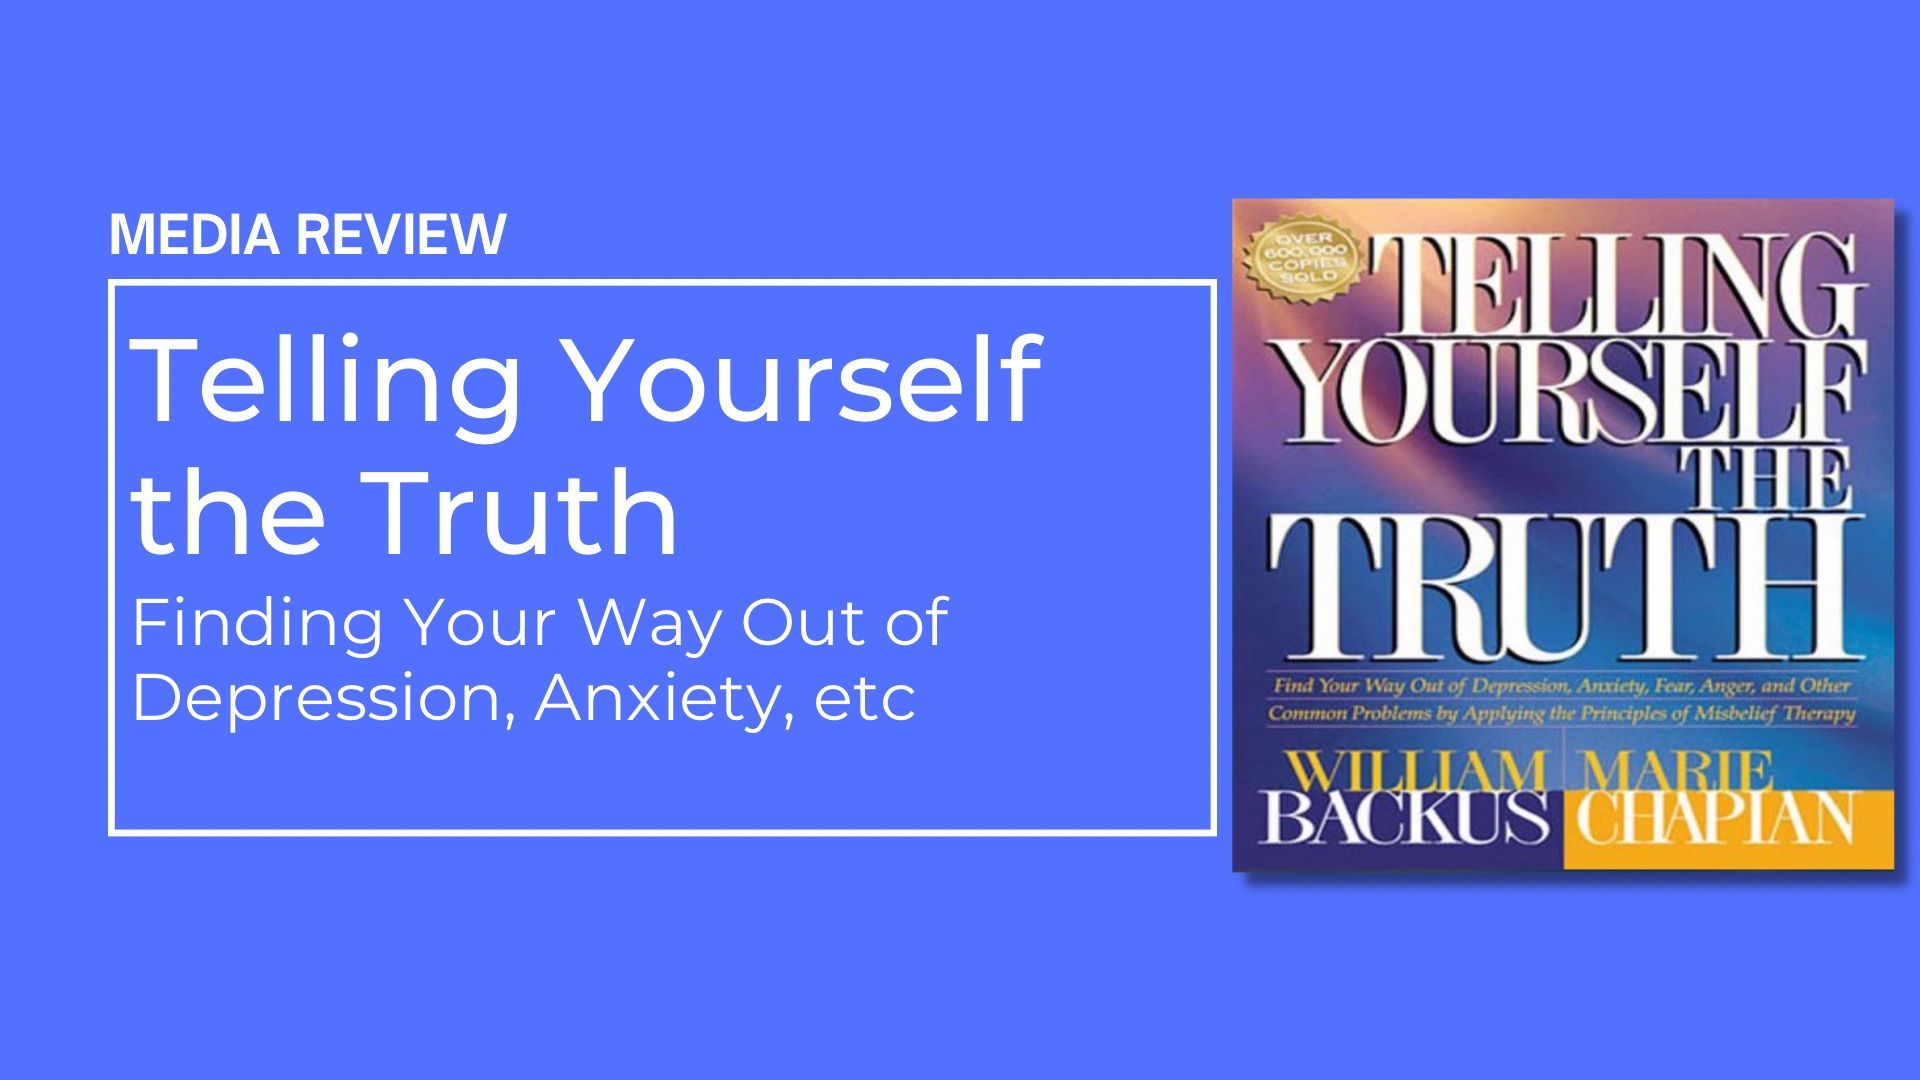 Book Review: Telling Yourself the Truth